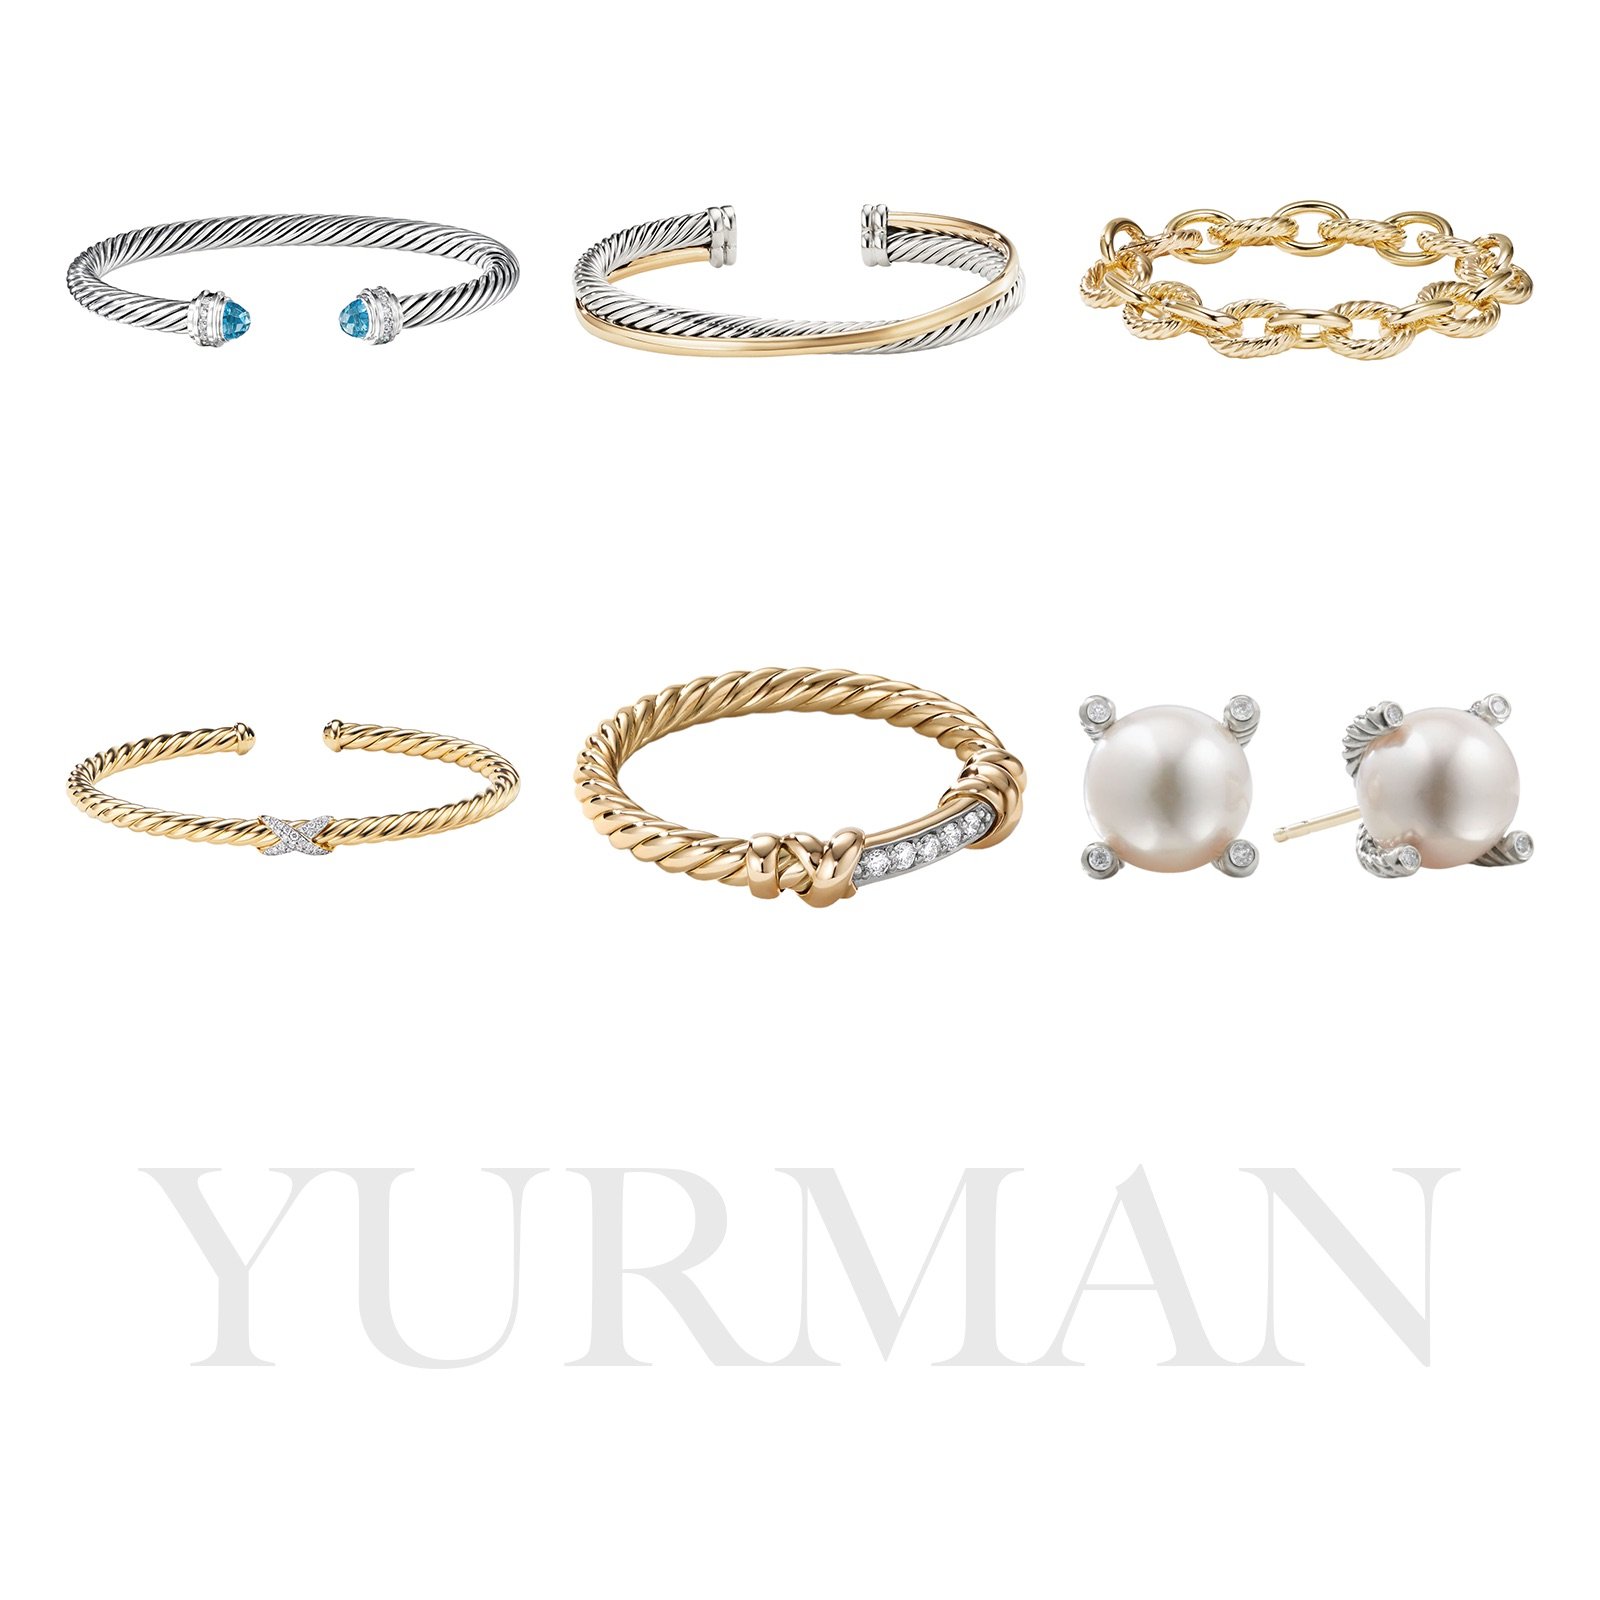 Discovering the Splendor of a $30,000 David Yurman Jewelry Collection ...